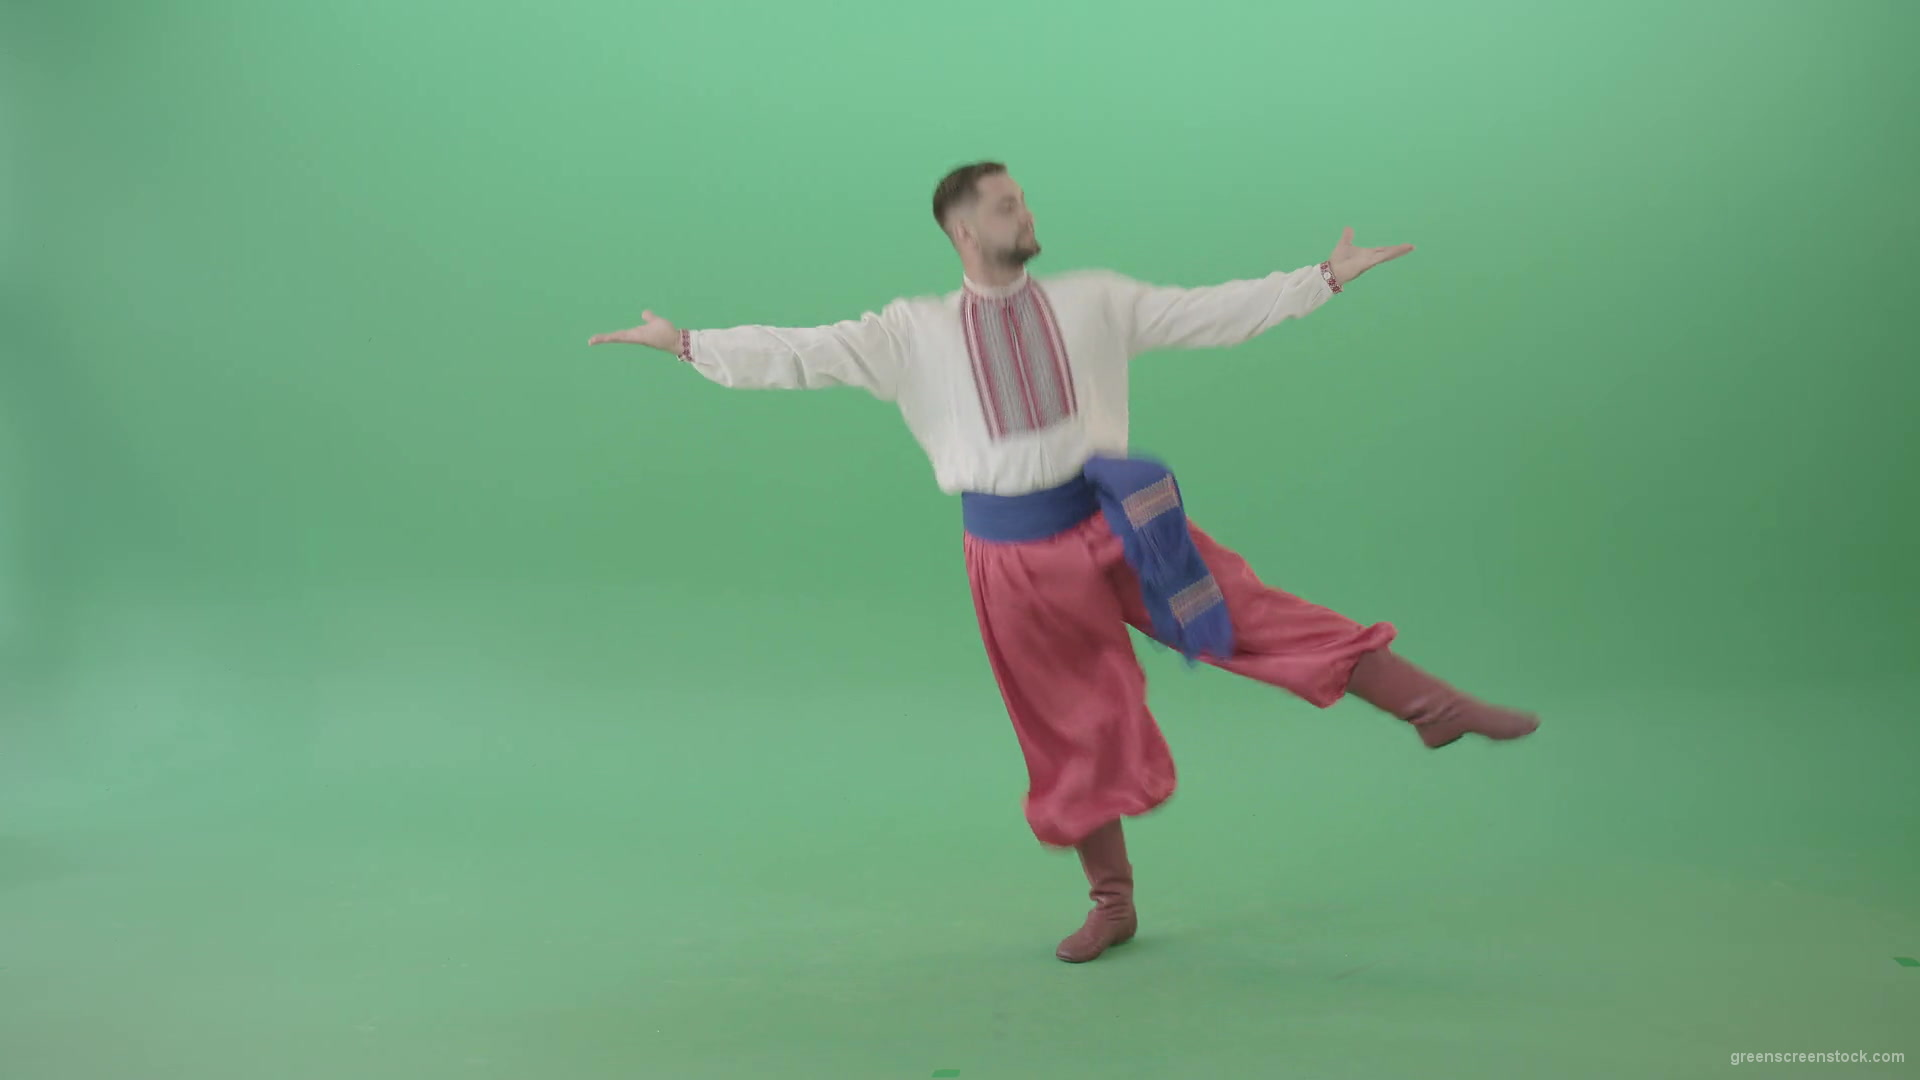 Slavic-Ukraine-folk-dance-by-UA-Cossack-man-jumping-isolated-on-Green-Background-4K-Video-Footage-1920_008 Green Screen Stock